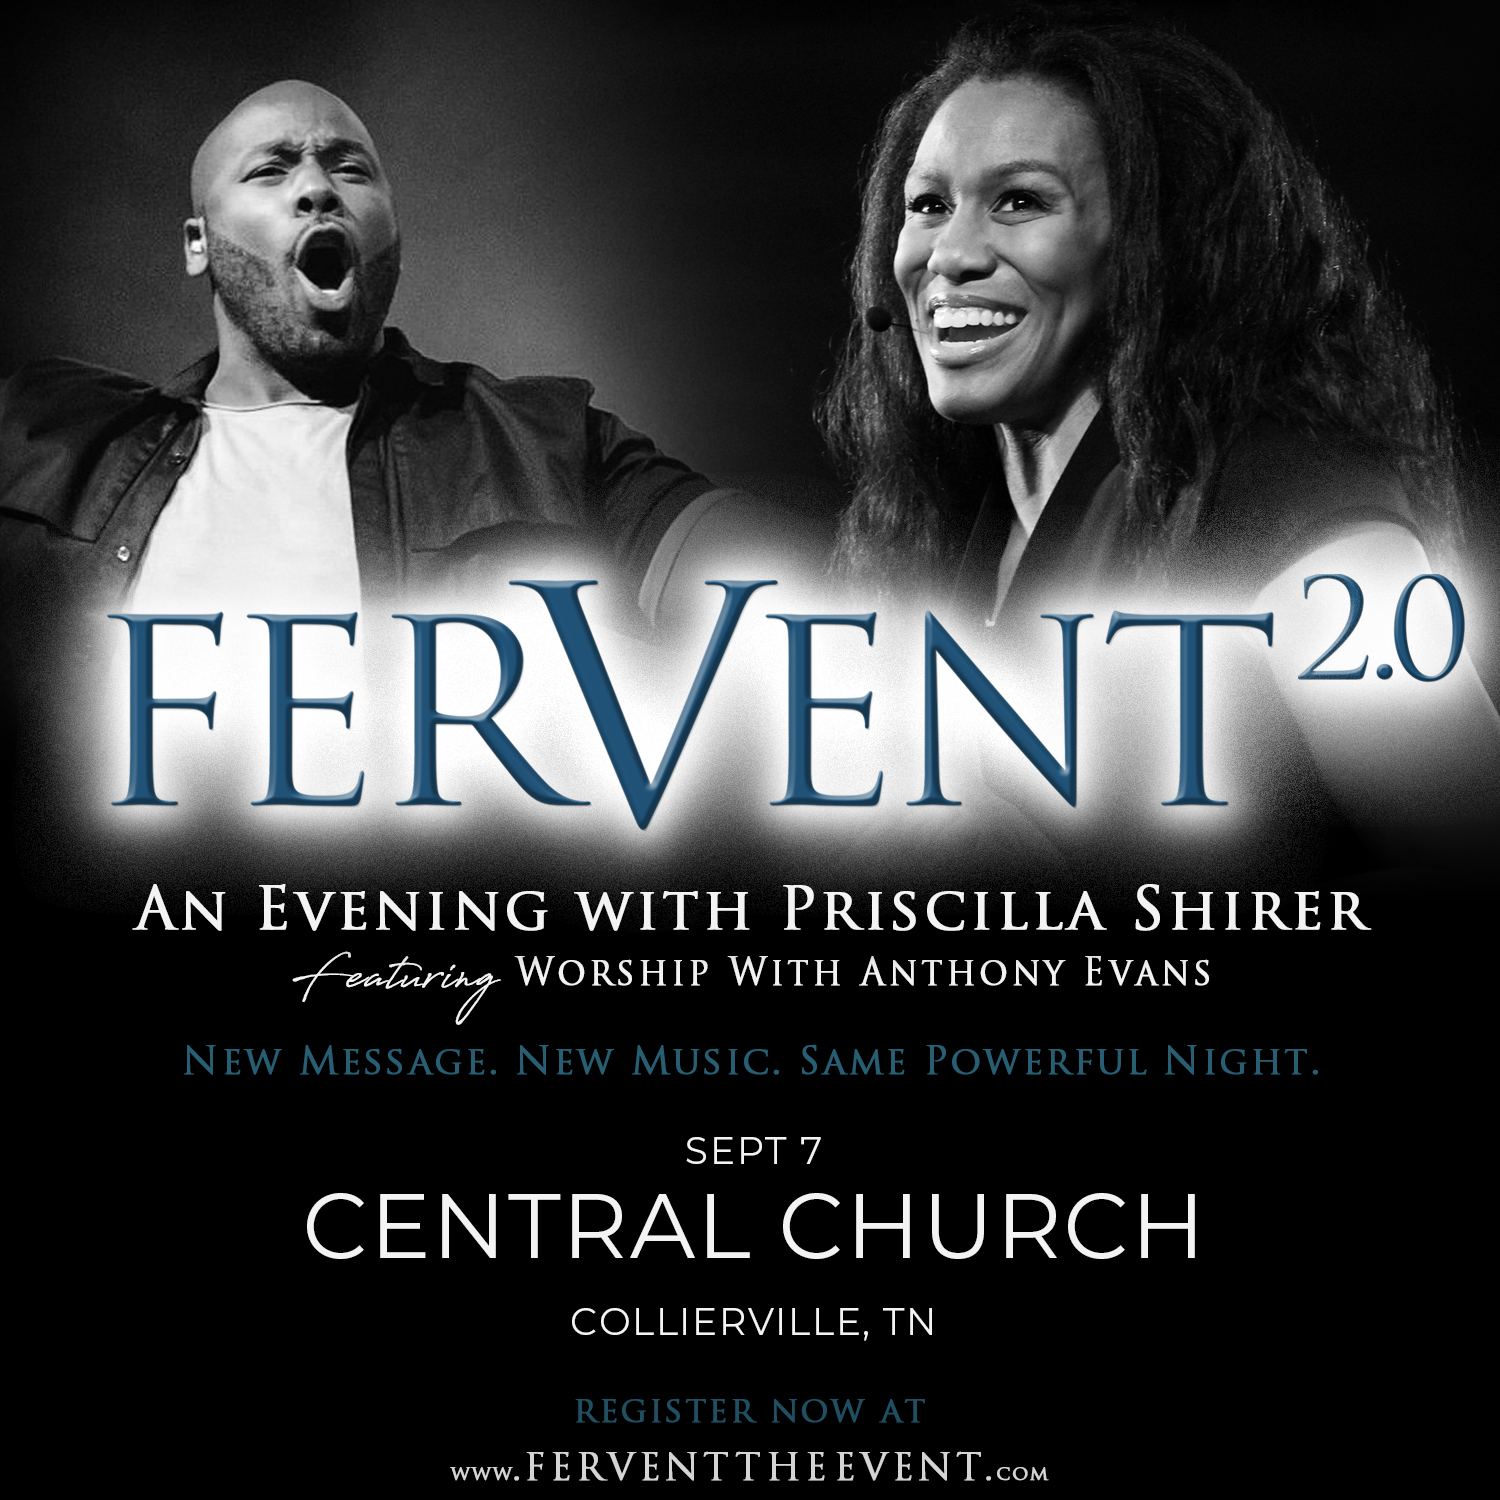 Unpacking The Fervent Event With Priscilla Shirer